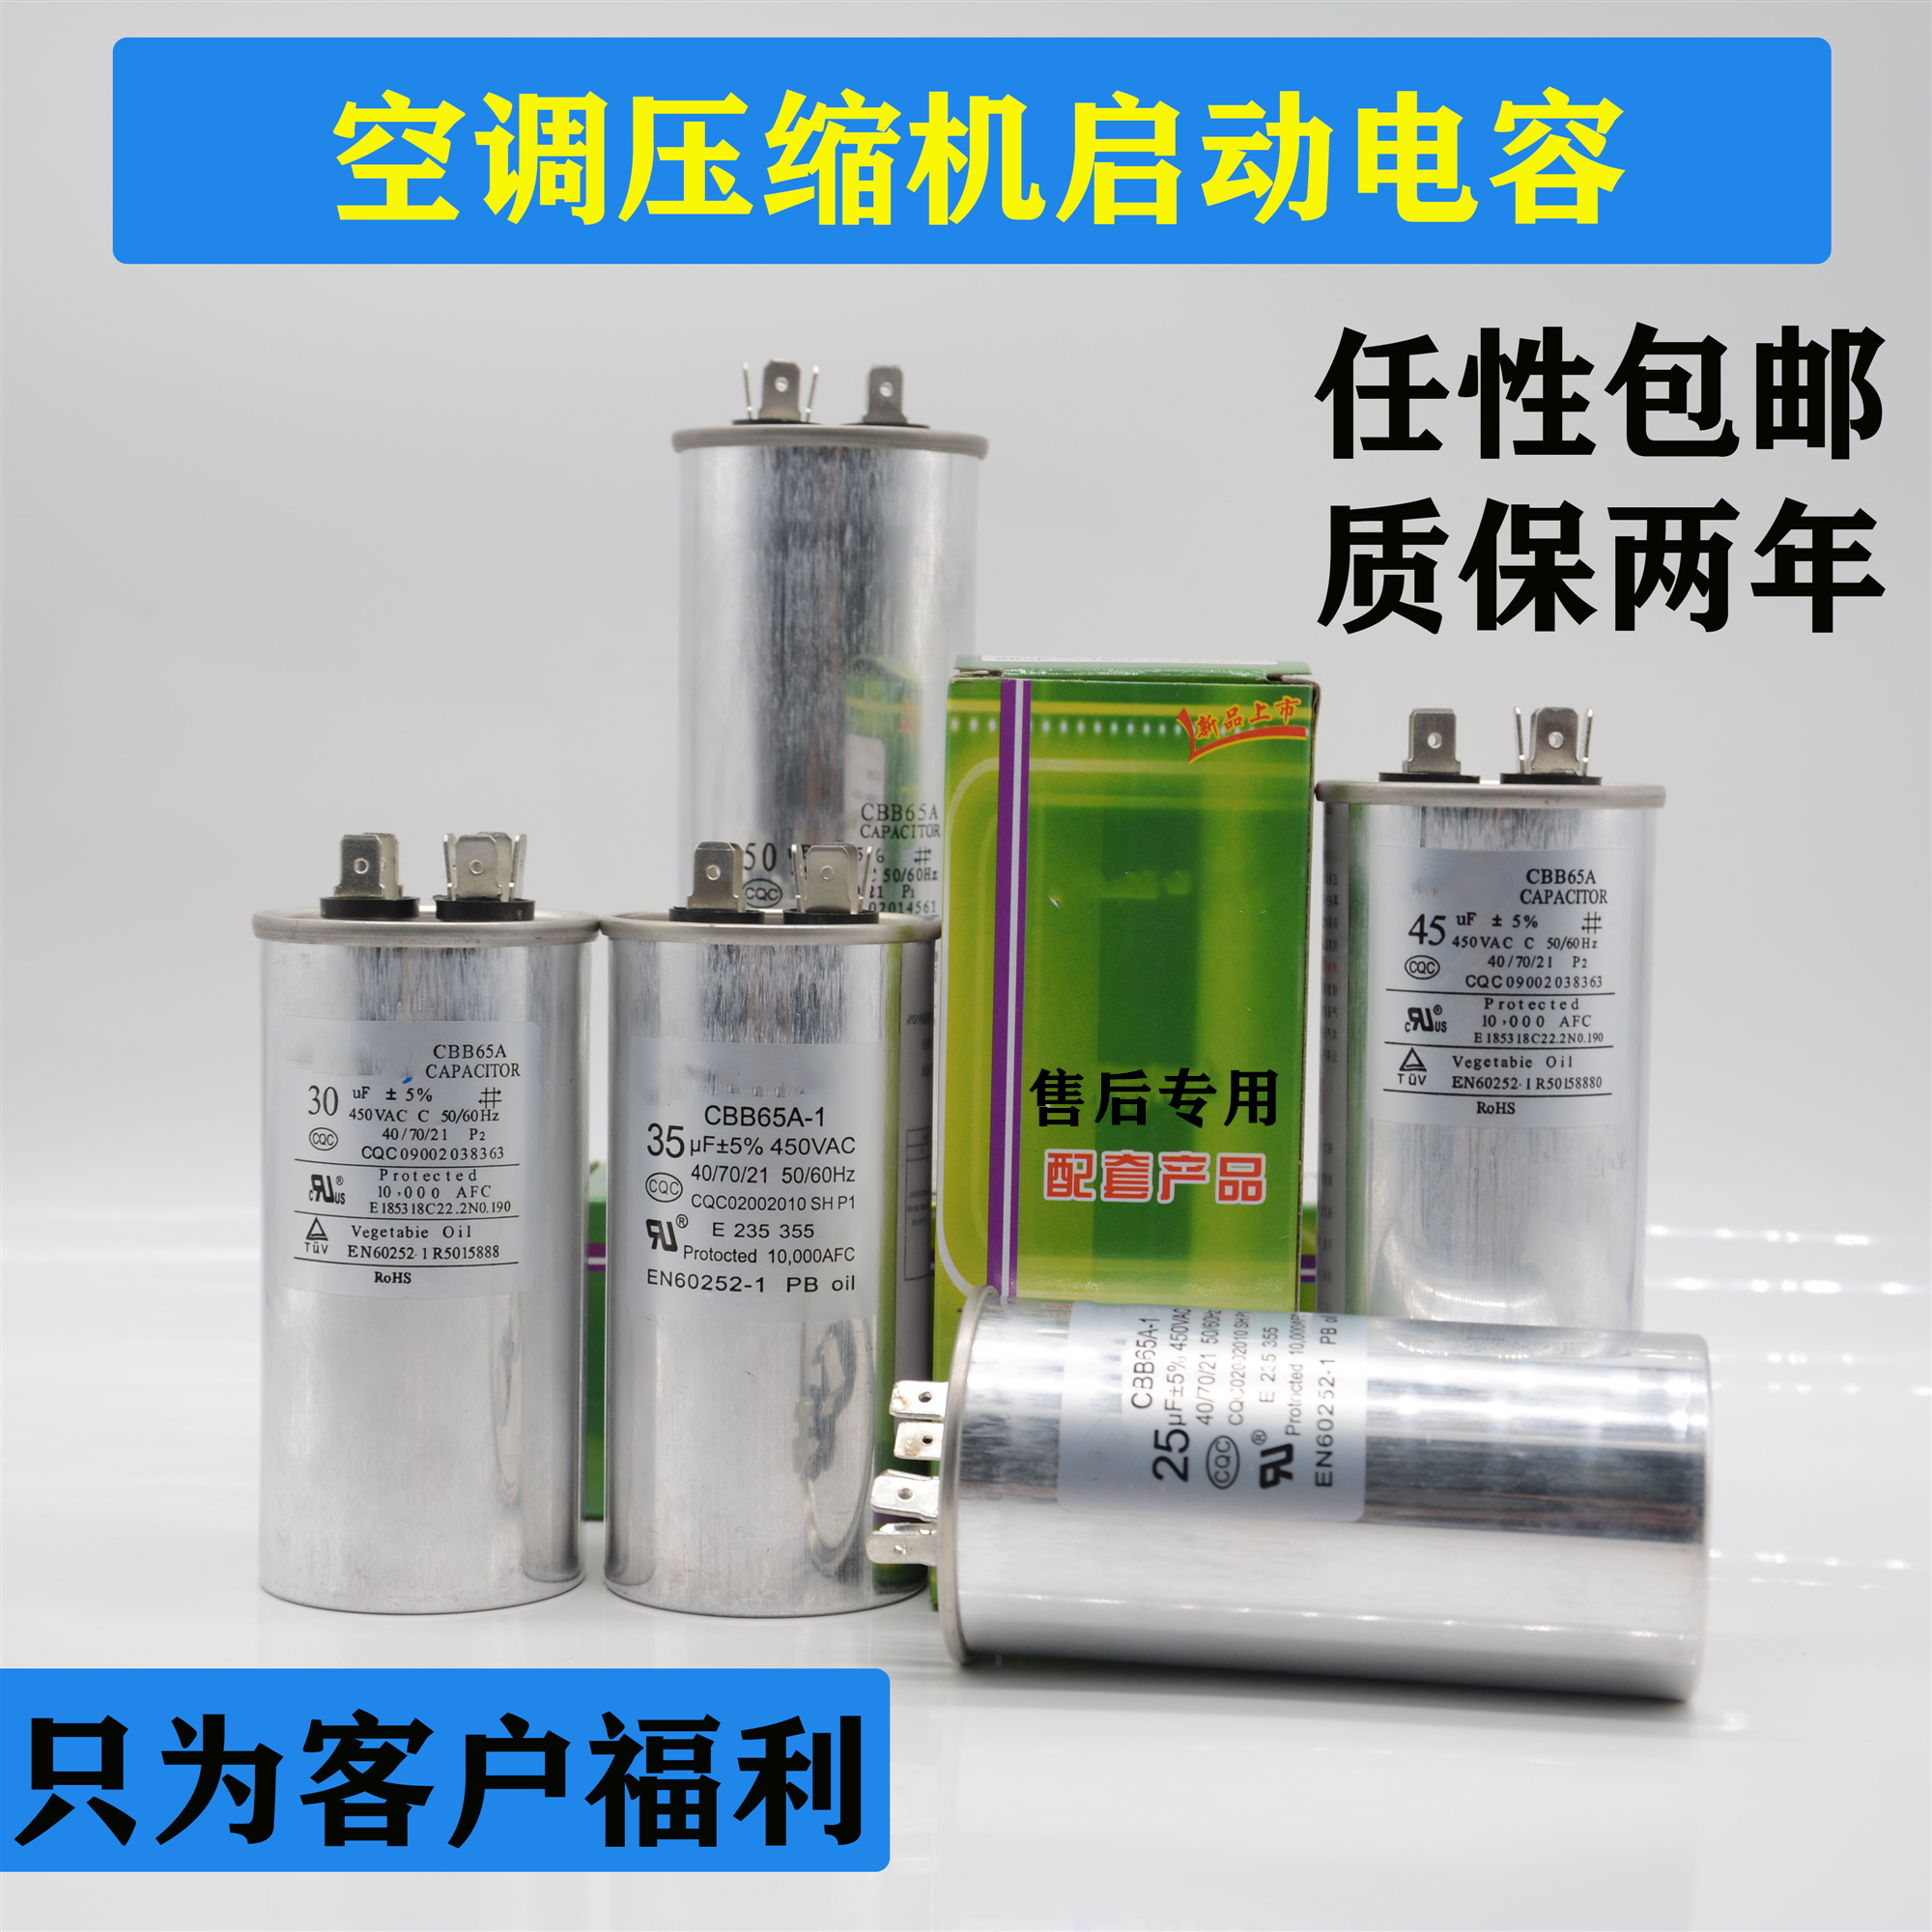 Air conditioning compressor starting capacitor explosion-proof starting capacitor 35uf450V external unit starting air conditioning capacitor